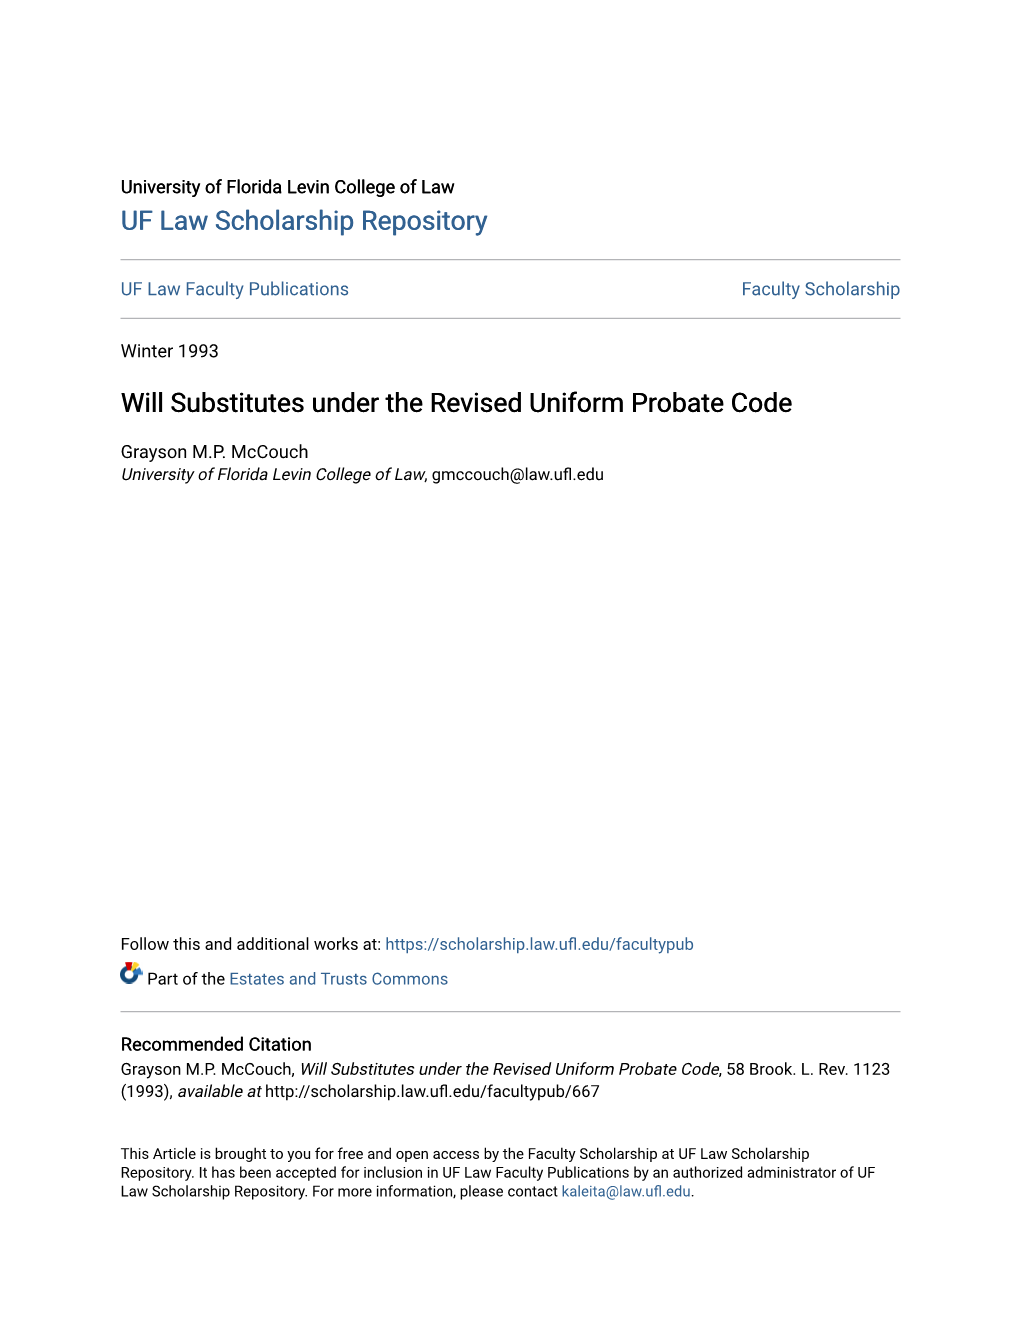 Will Substitutes Under the Revised Uniform Probate Code